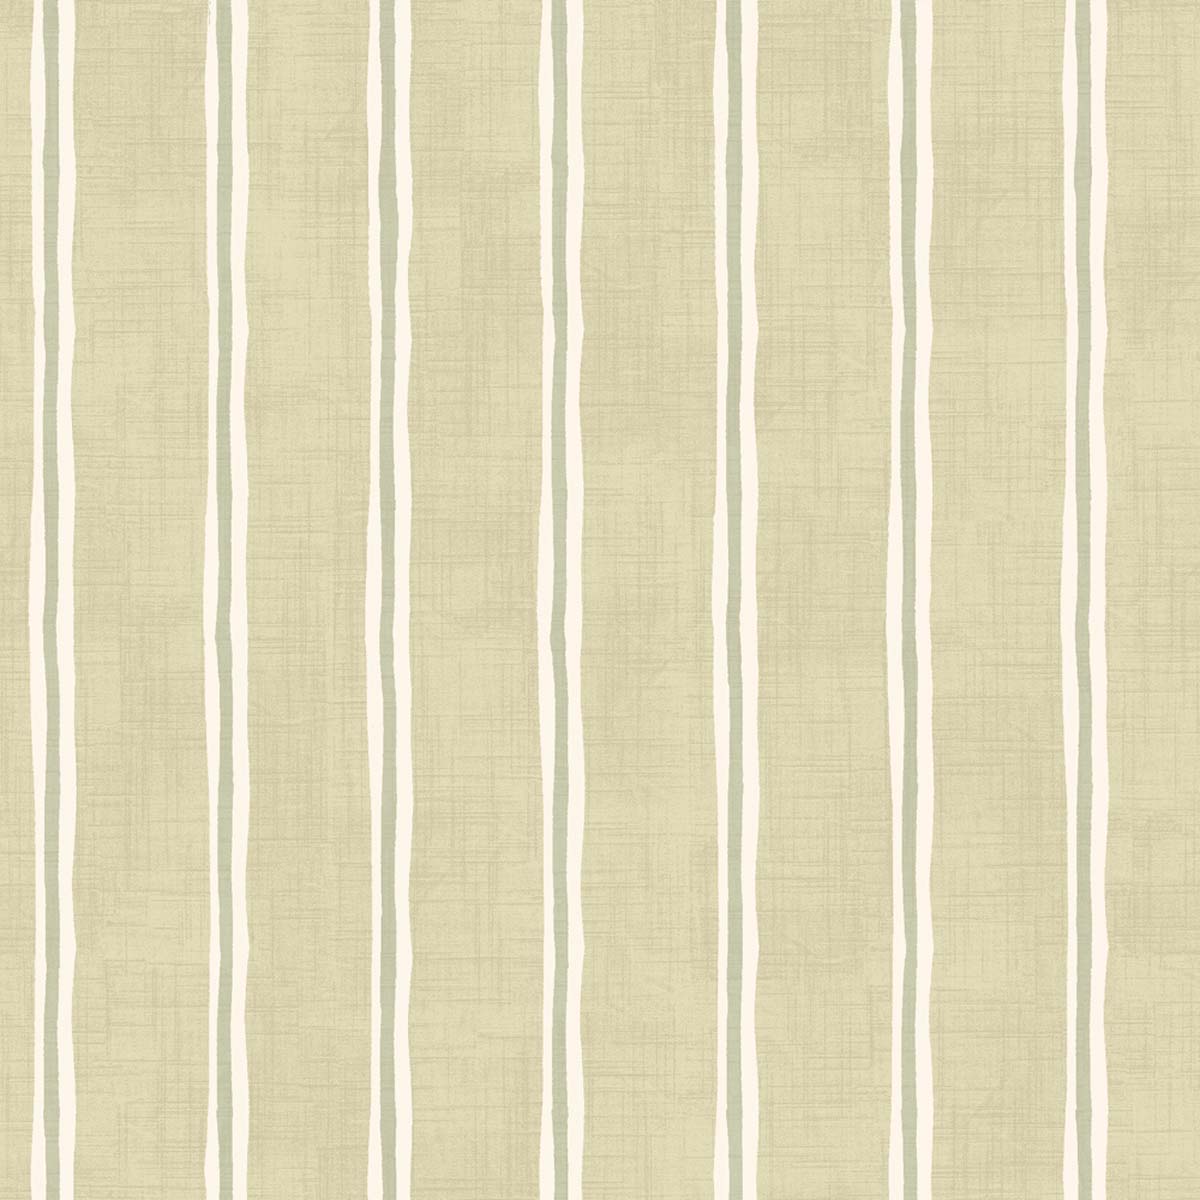 ROWING STRIPE WILLOW